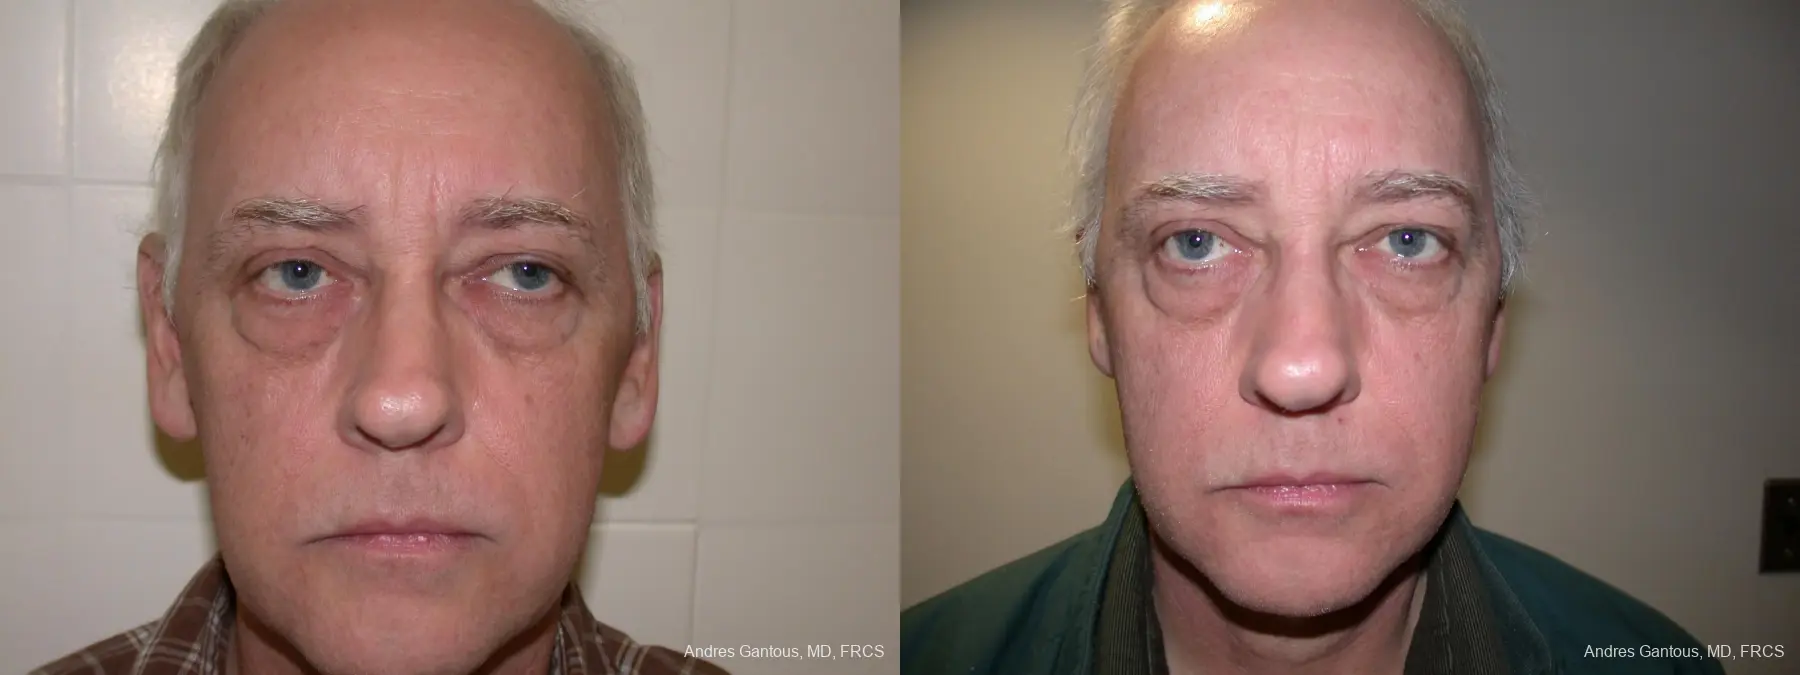 Otoplasty And Earlobe Repair: Patient 24 - Before and After 1